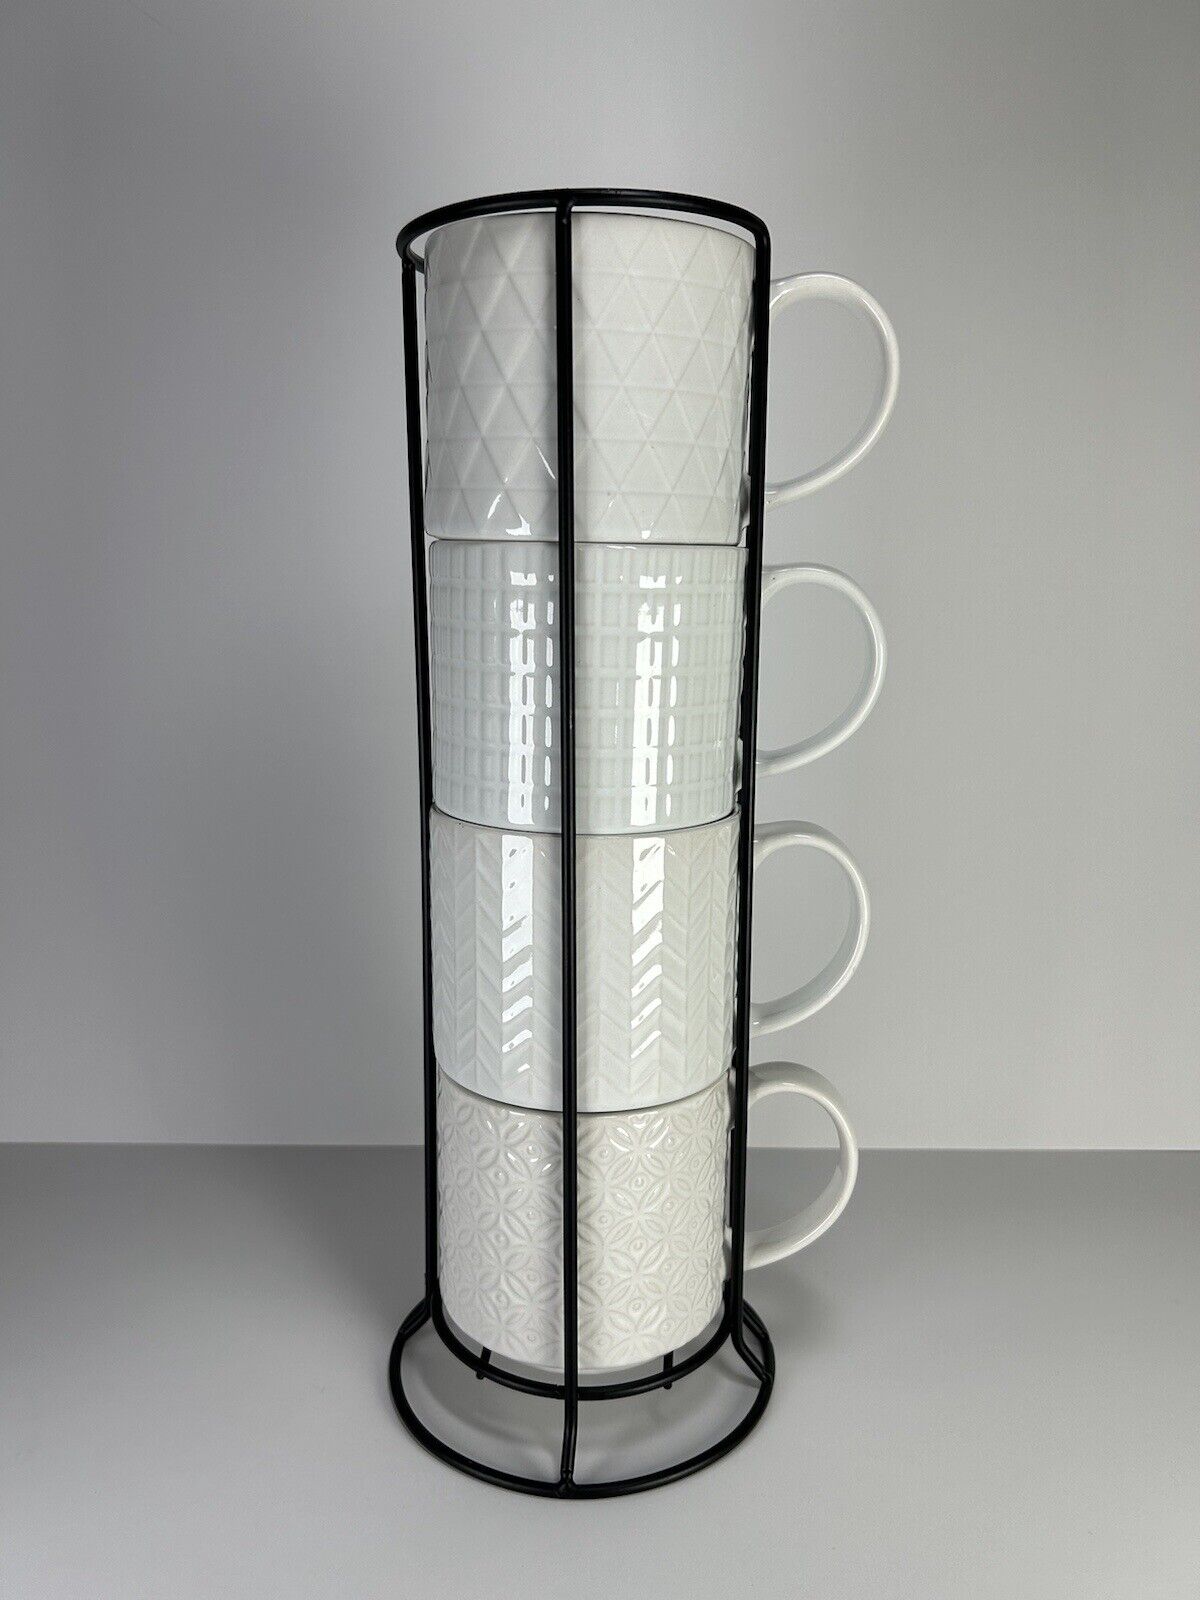 Over And Back White Embossed Design 4 Stackable Mugs With Metal Holder